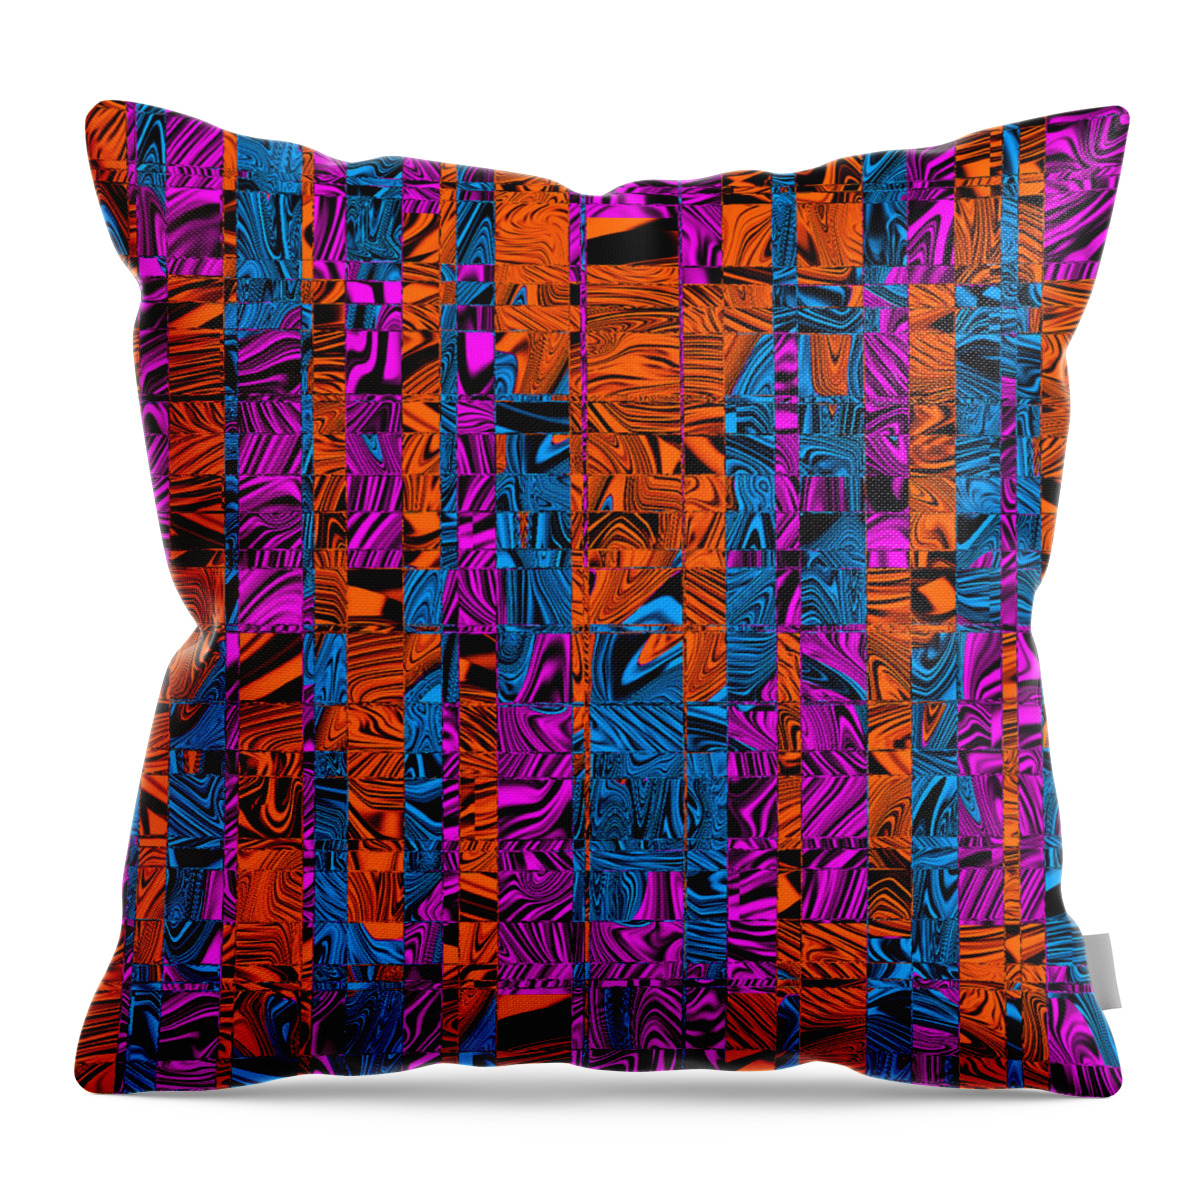 Digital Throw Pillow featuring the digital art Abstract Pattern by Ronald Mills